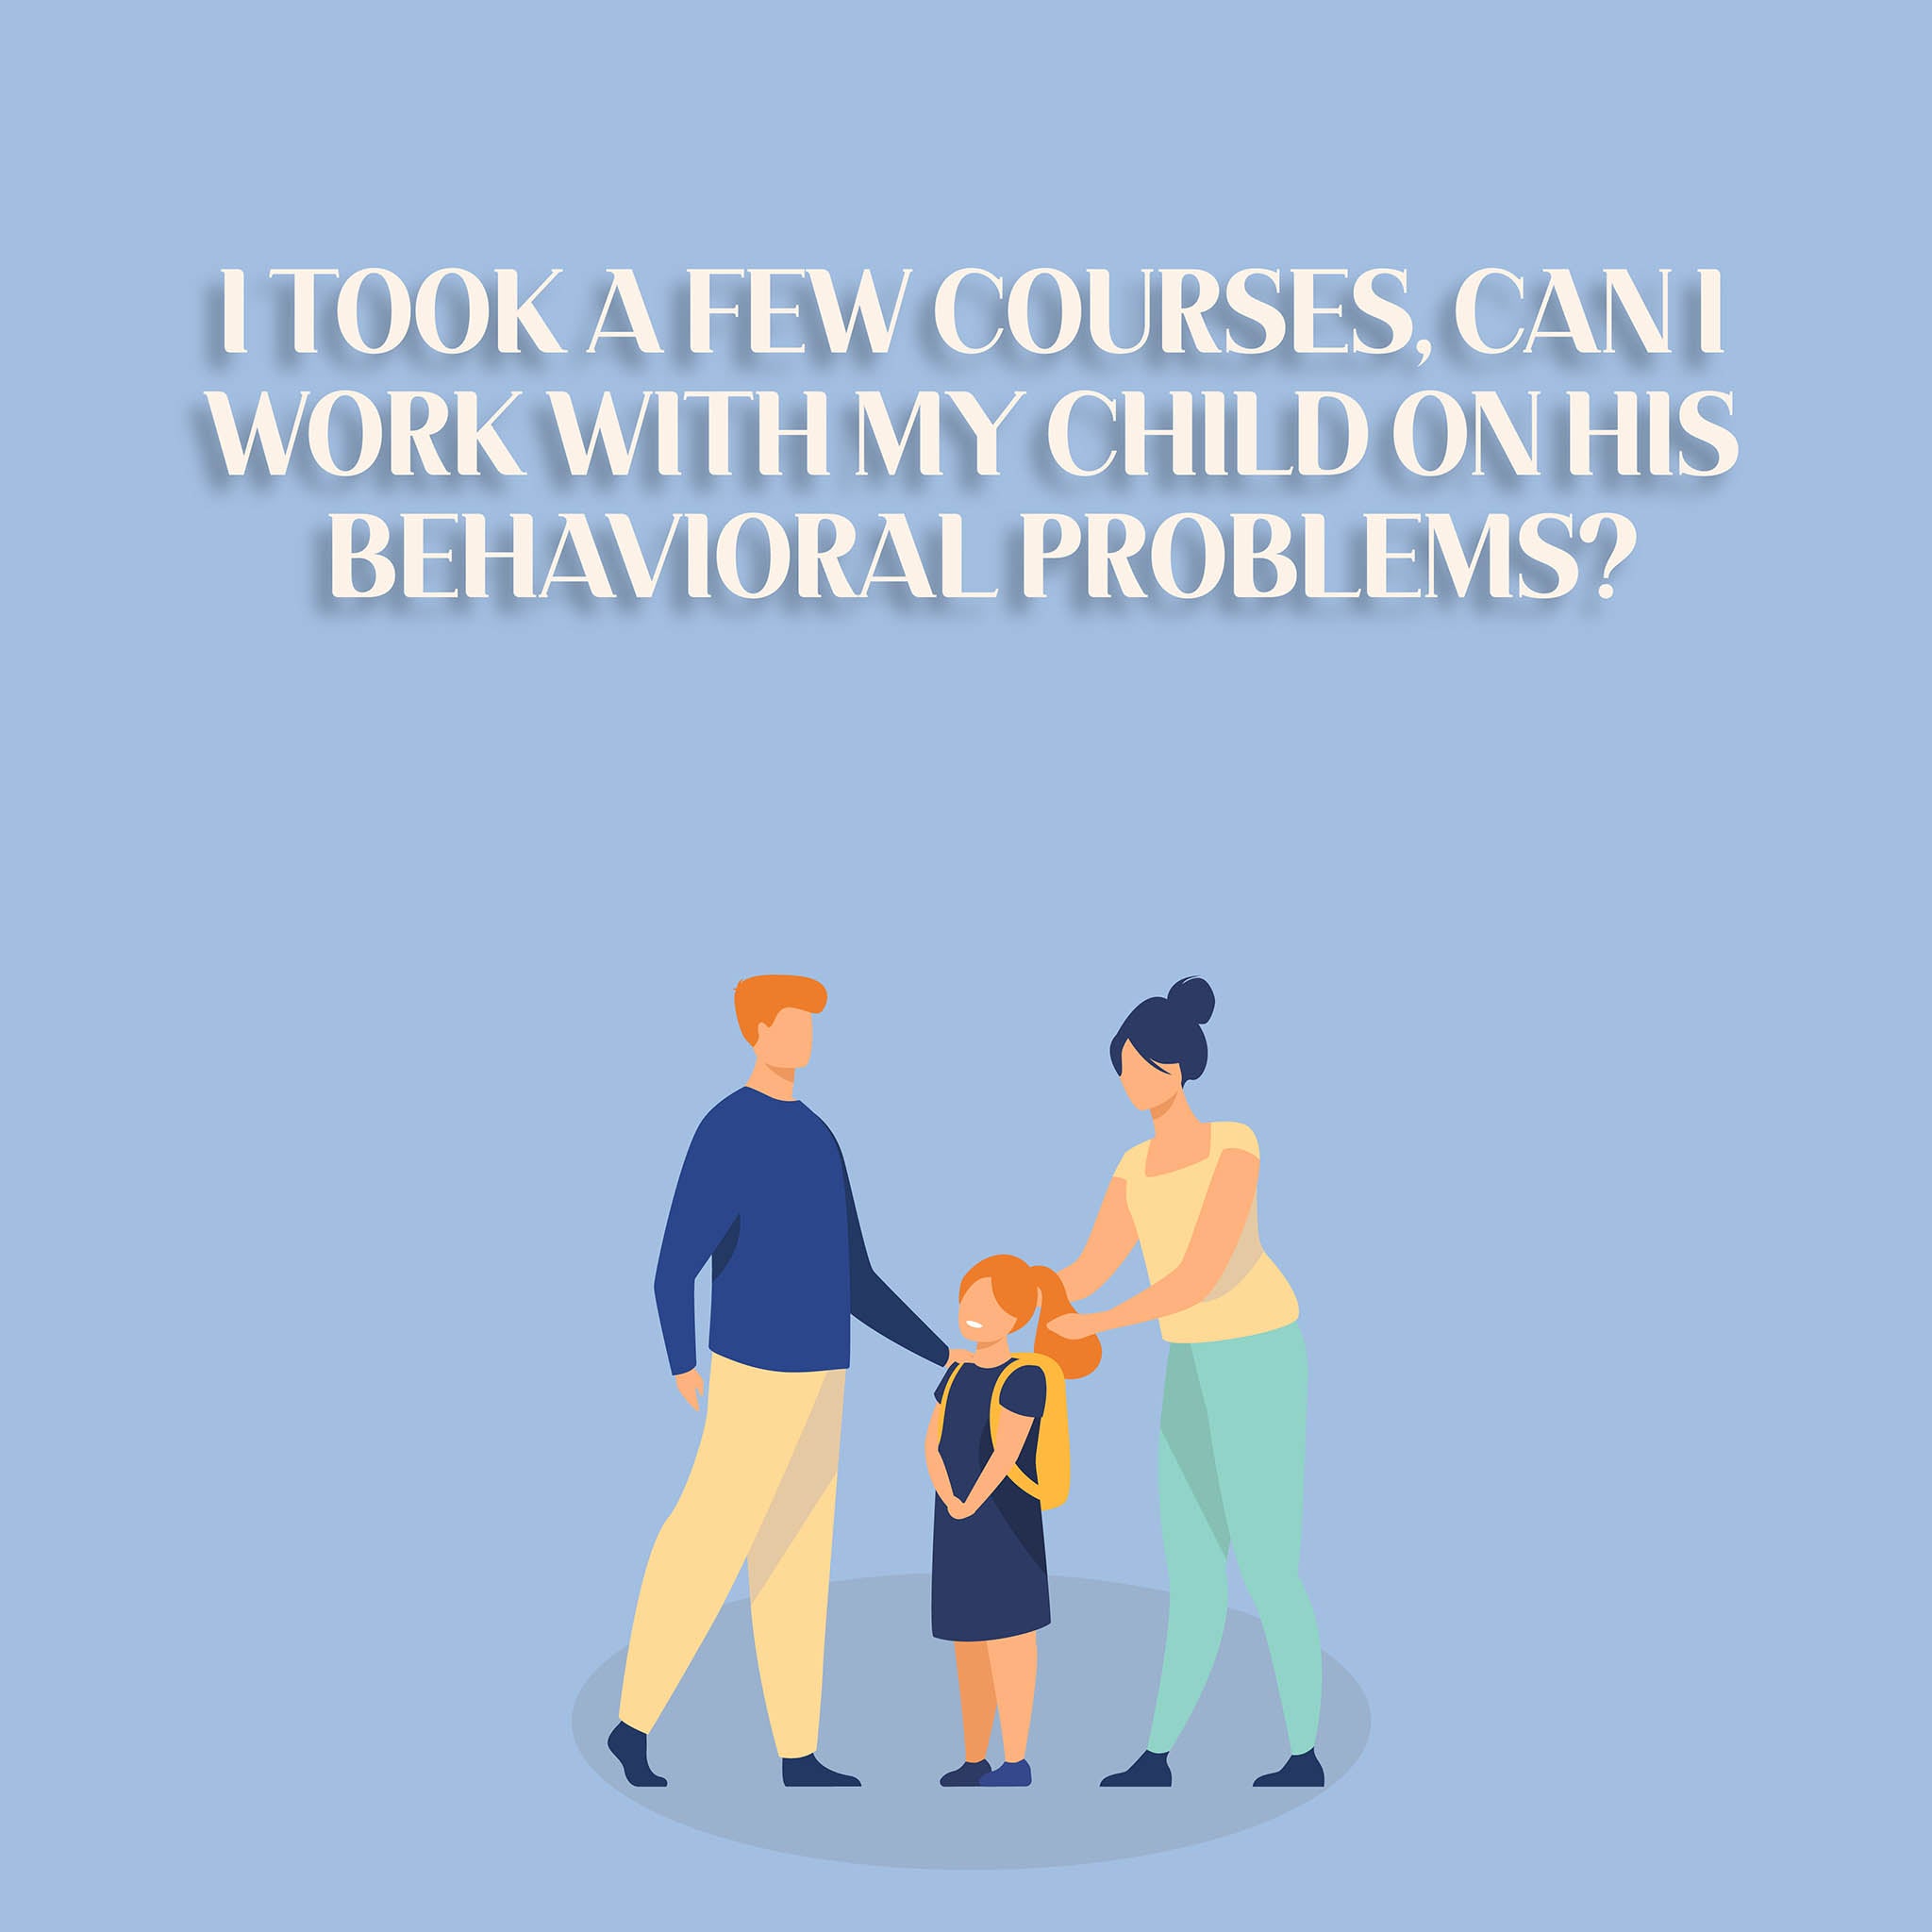 I Took A Few Courses, Can I Work With My Child on HIs Behavioral Problems?